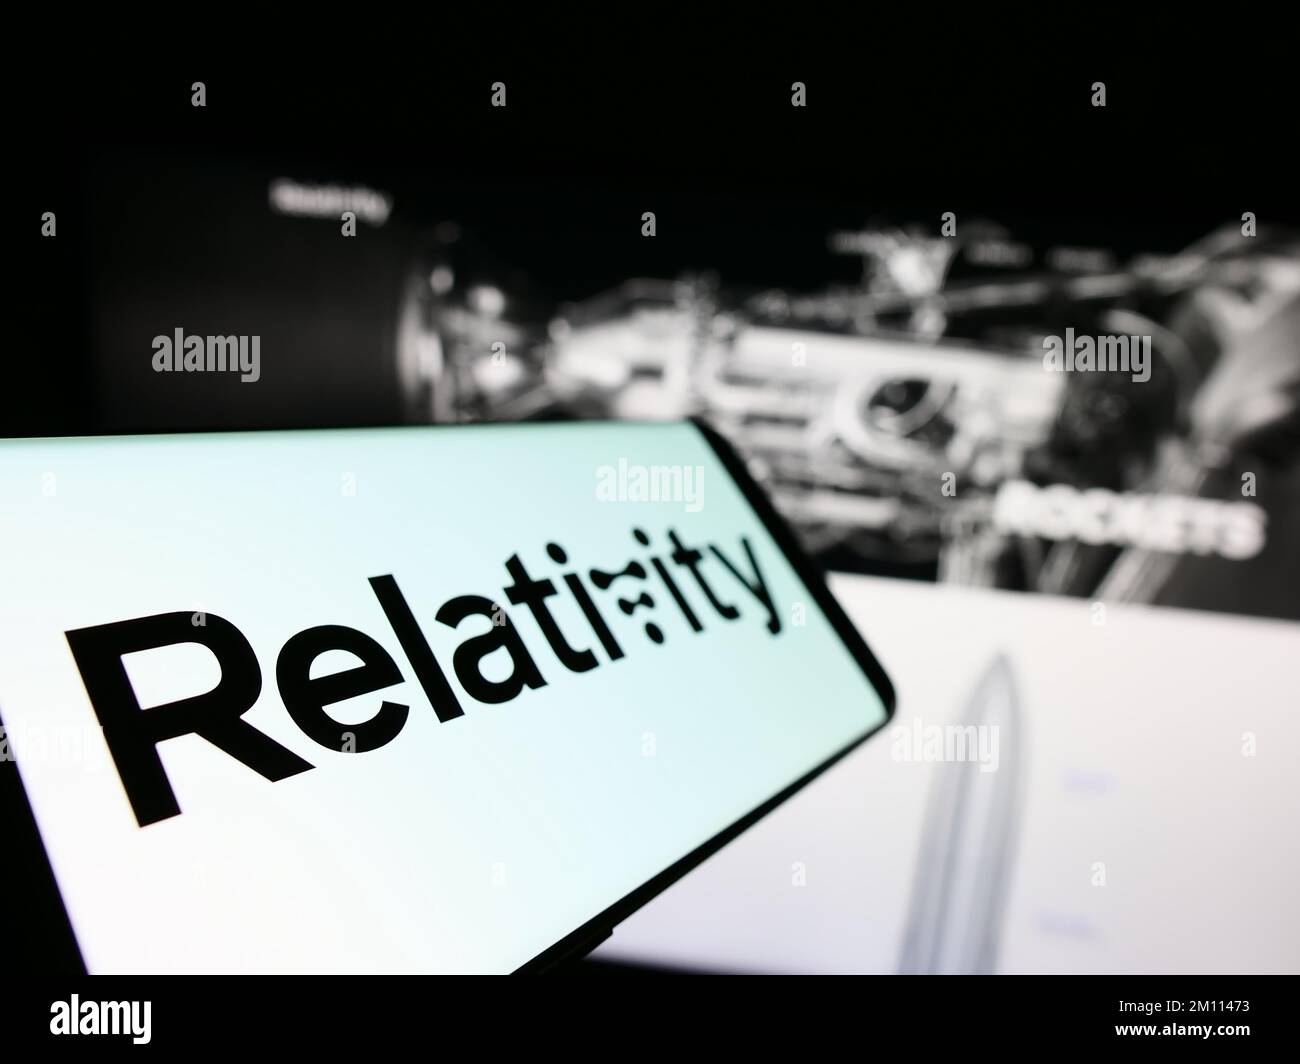 Smartphone with logo of American aerospace company Relativity Space Inc. on screen in front of business website. Focus on left of phone display. Stock Photo